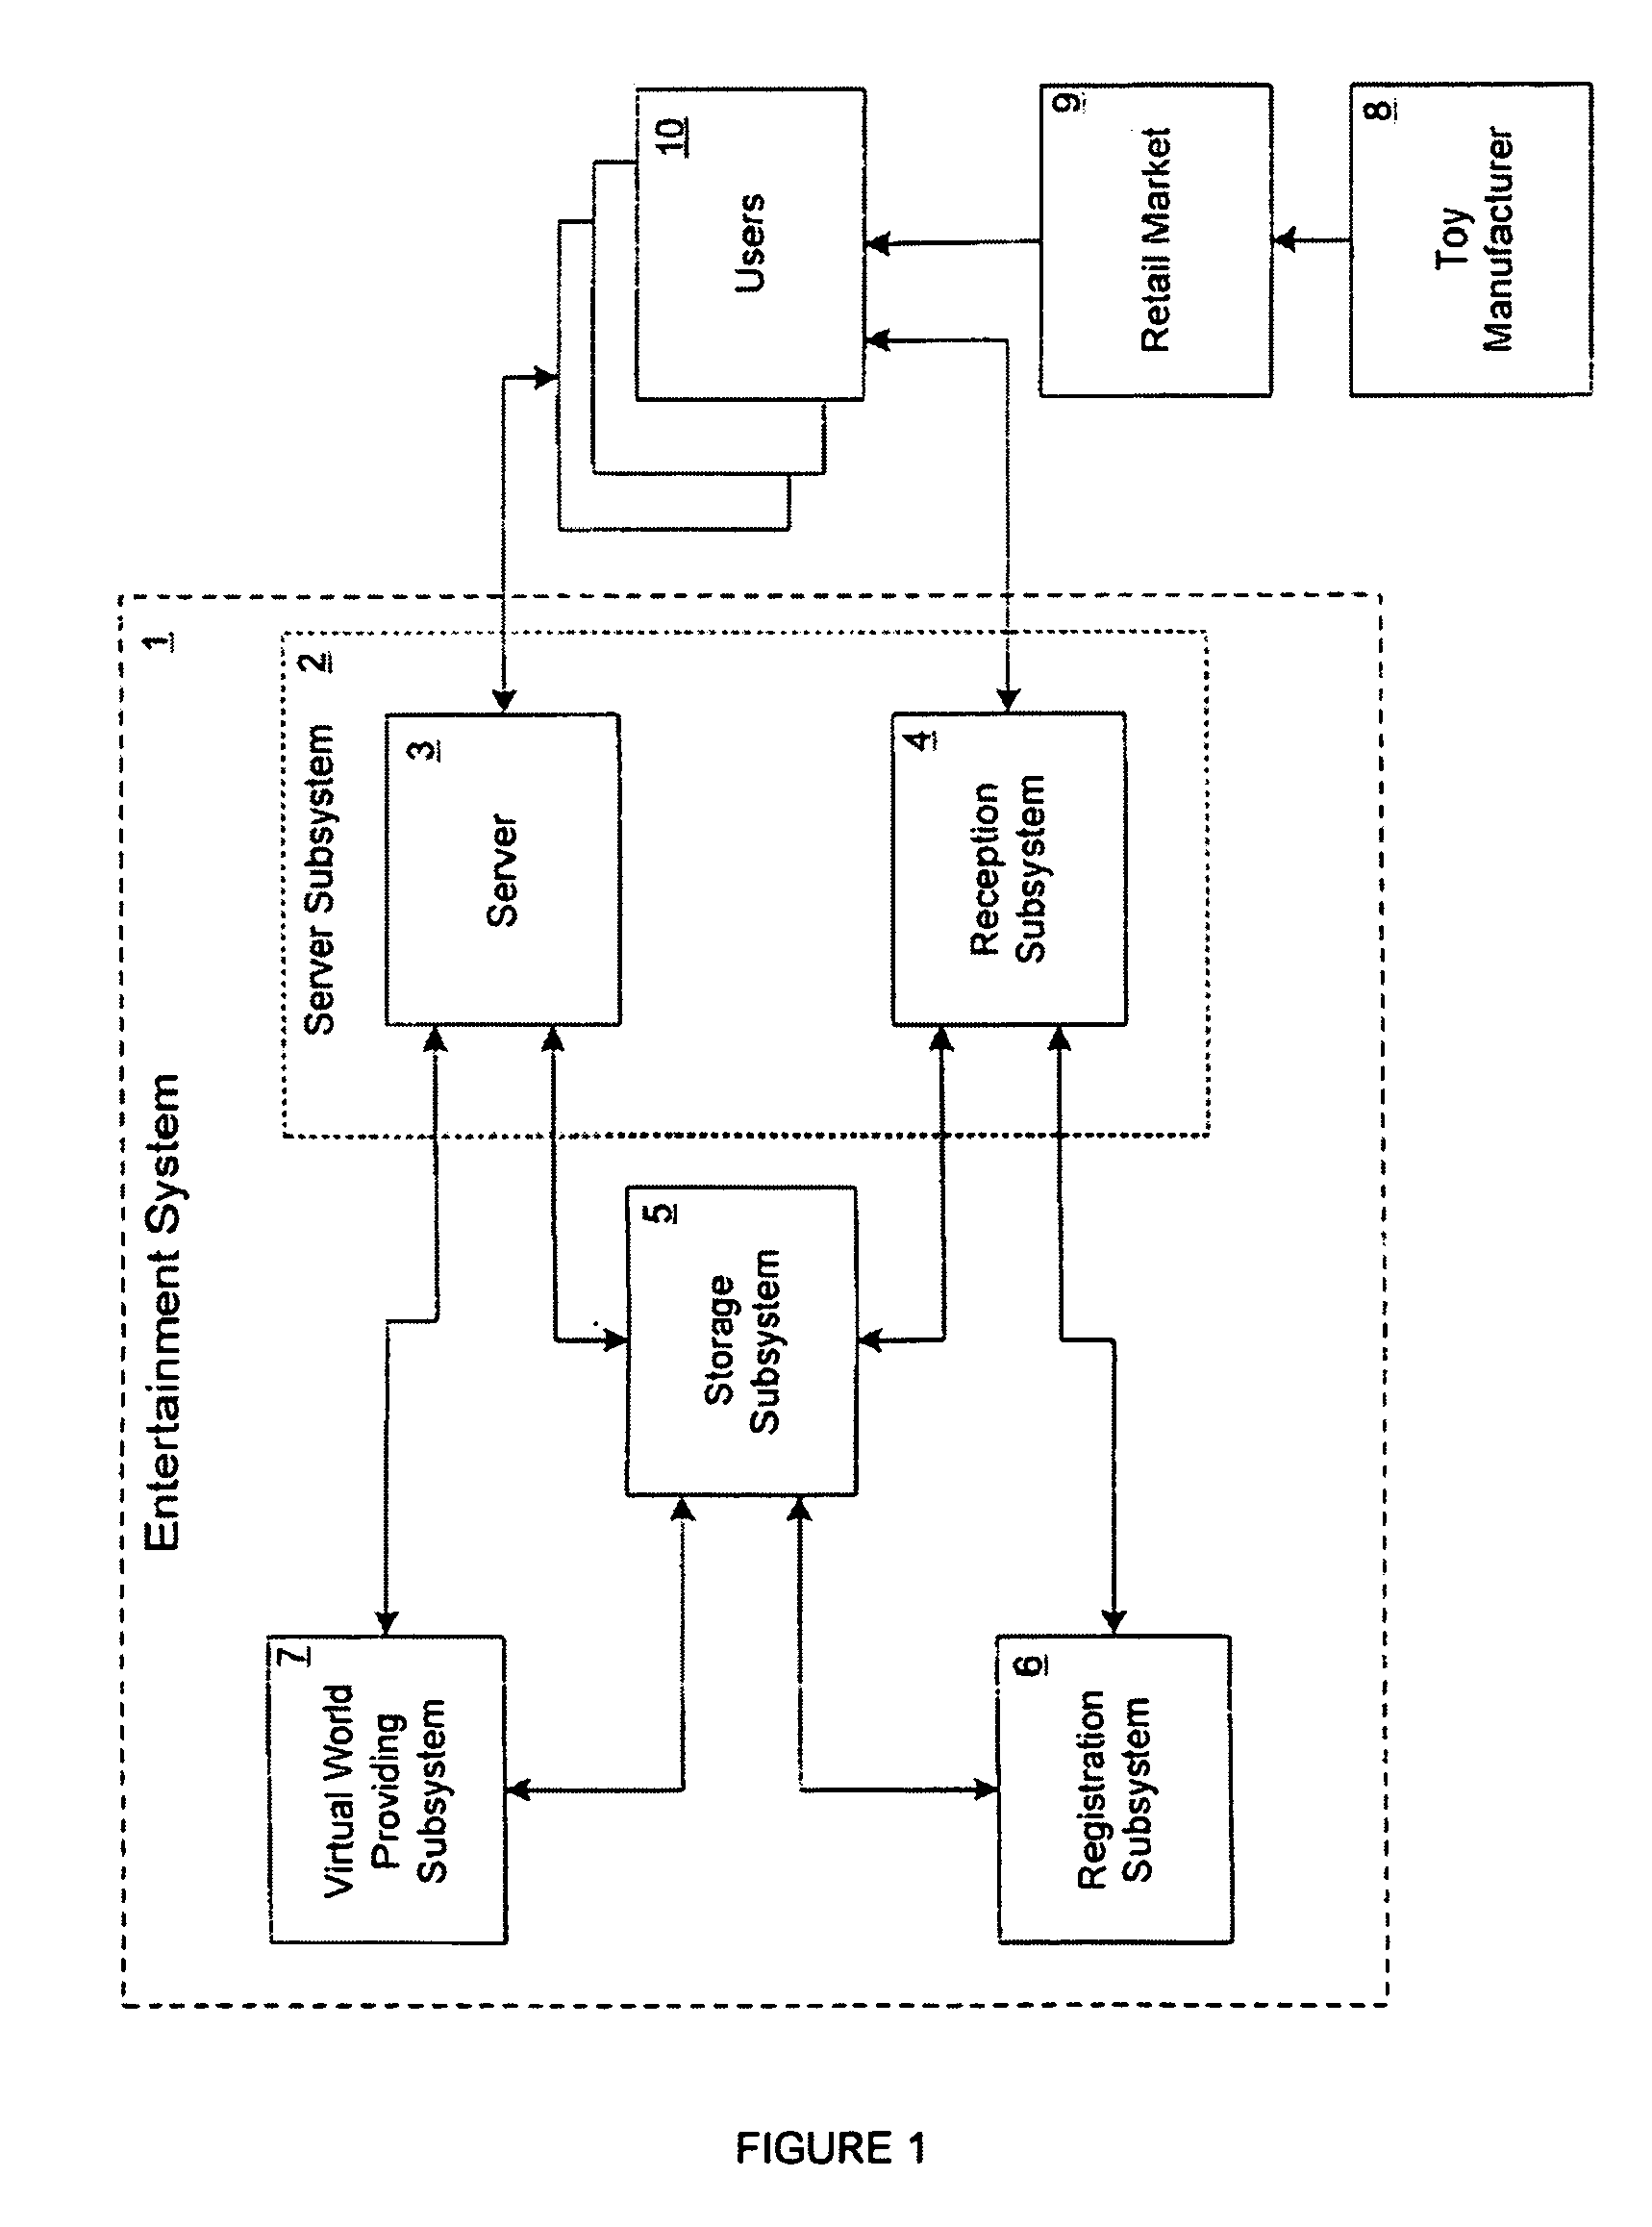 System and method for product marketing using feature codes